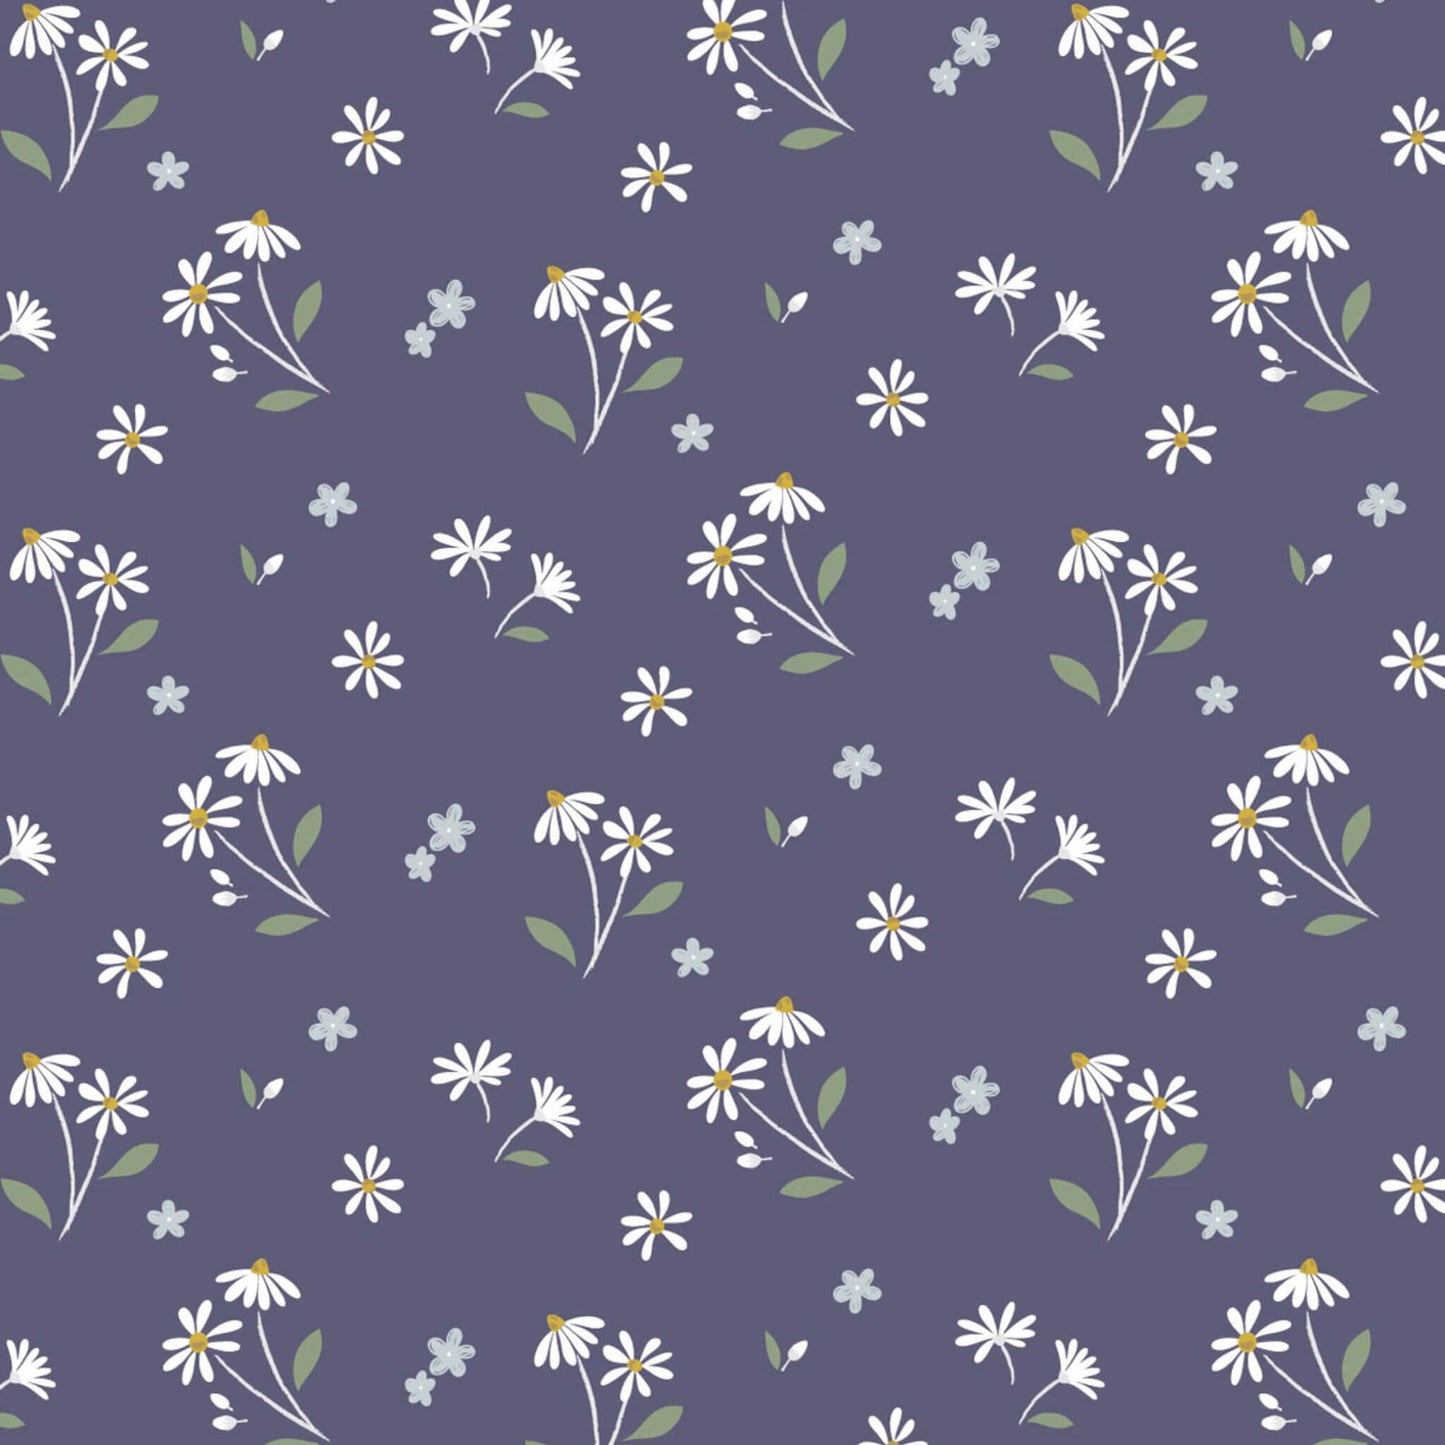 Daisies Dancing - Floral Song Fabric Range - Lewis and Irene - Navy Blue